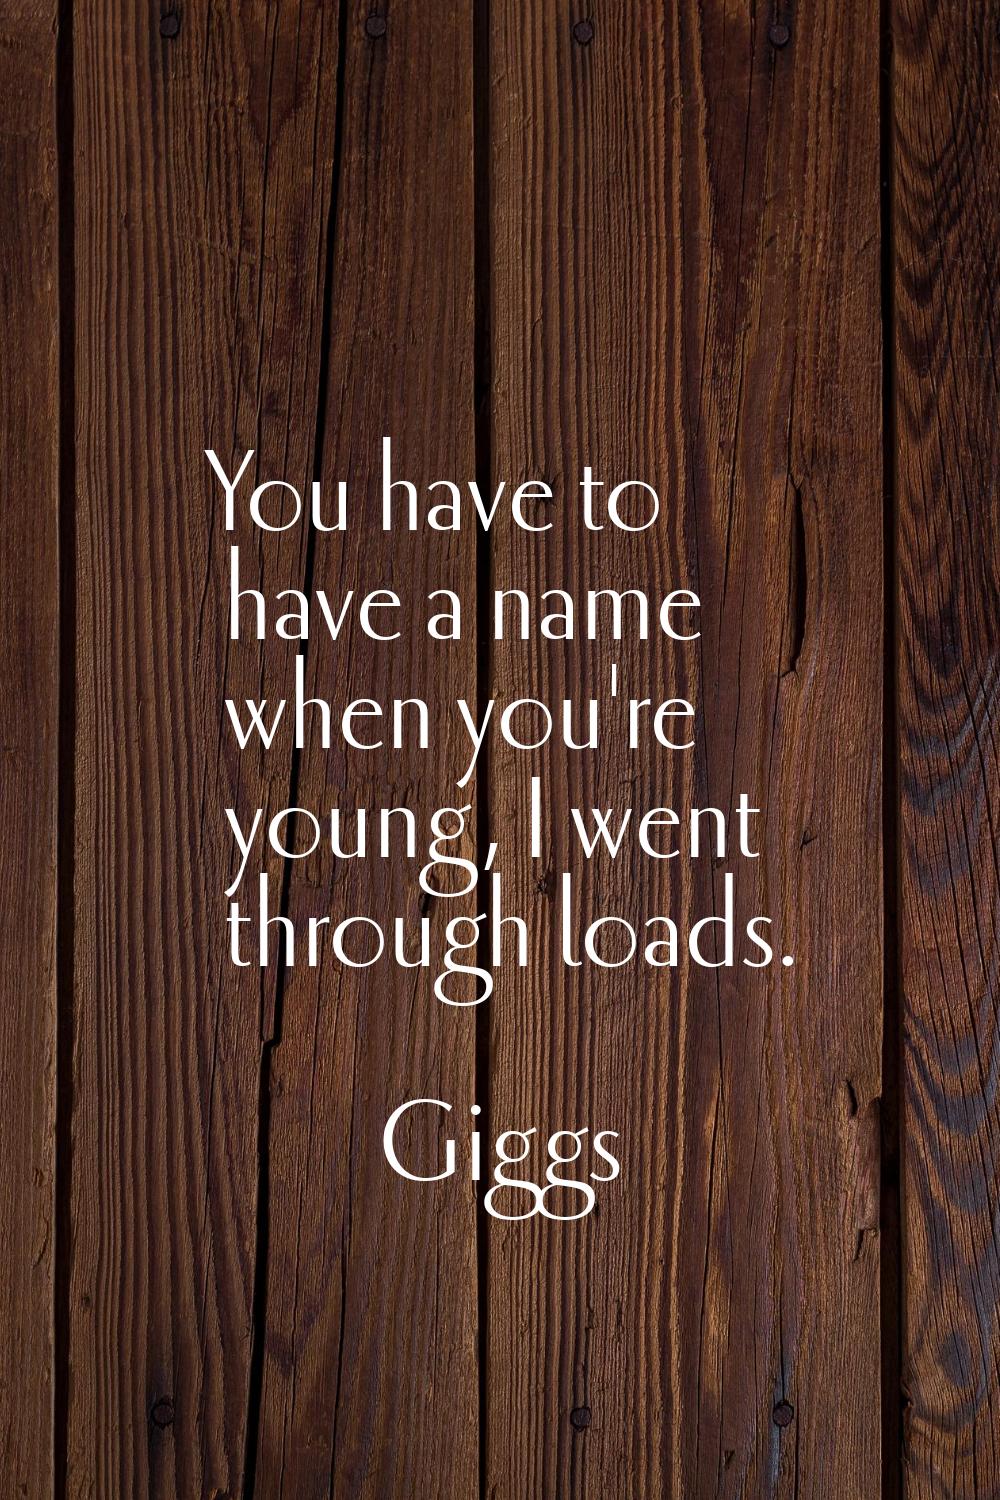 You have to have a name when you're young, I went through loads.